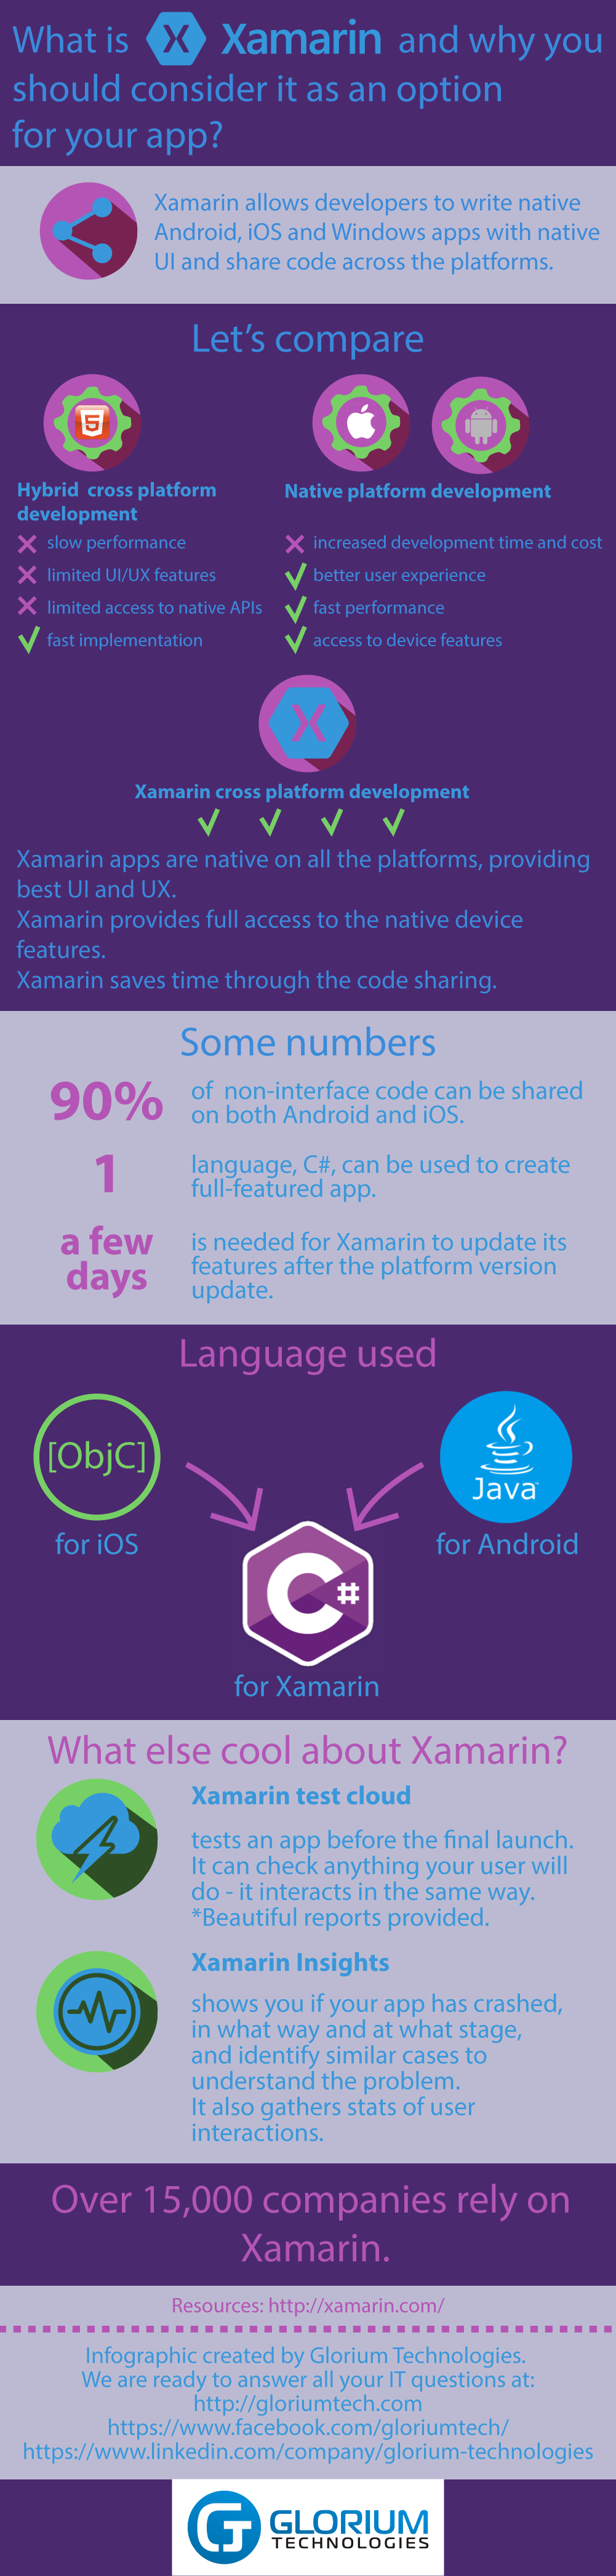 xamarin benefits for business infographic